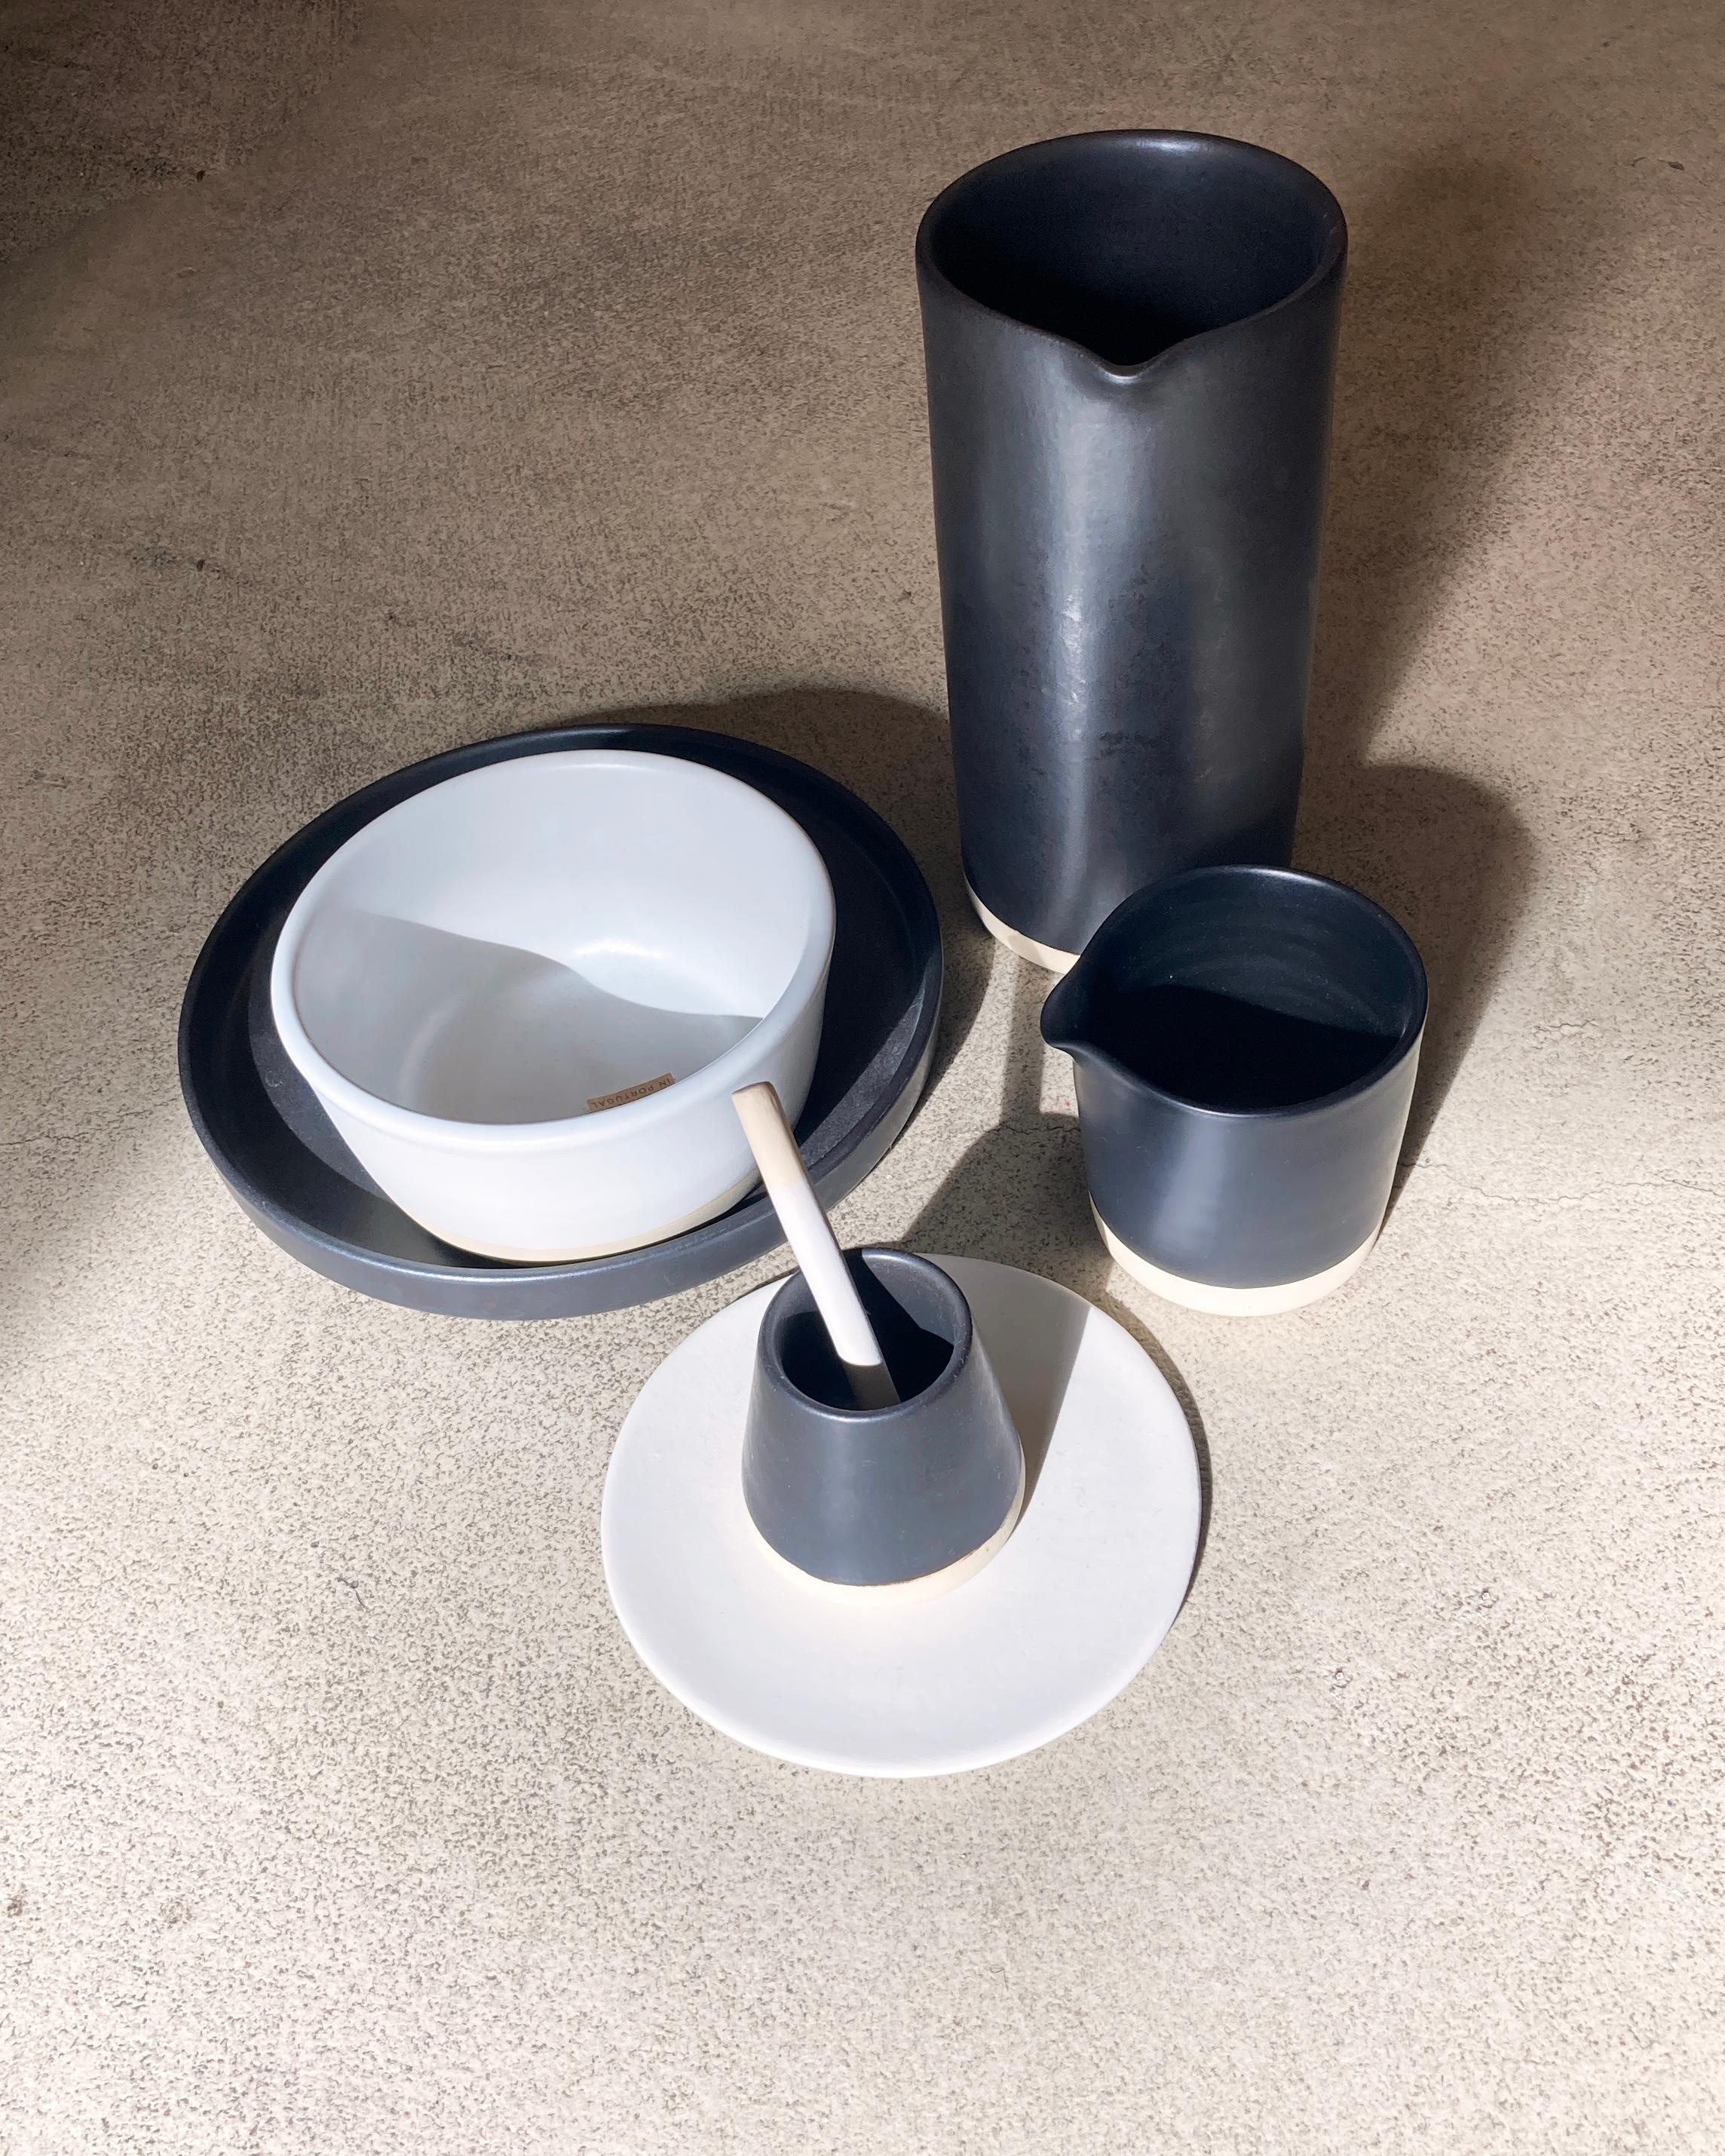 Handmade and hand painted ceramics from one of the mother countries, Portugal, these beautiful pieces for your table will add a modern touch and are perfect to mix and match. This matte-glazed cup is available in black or white.

Size: 2” height